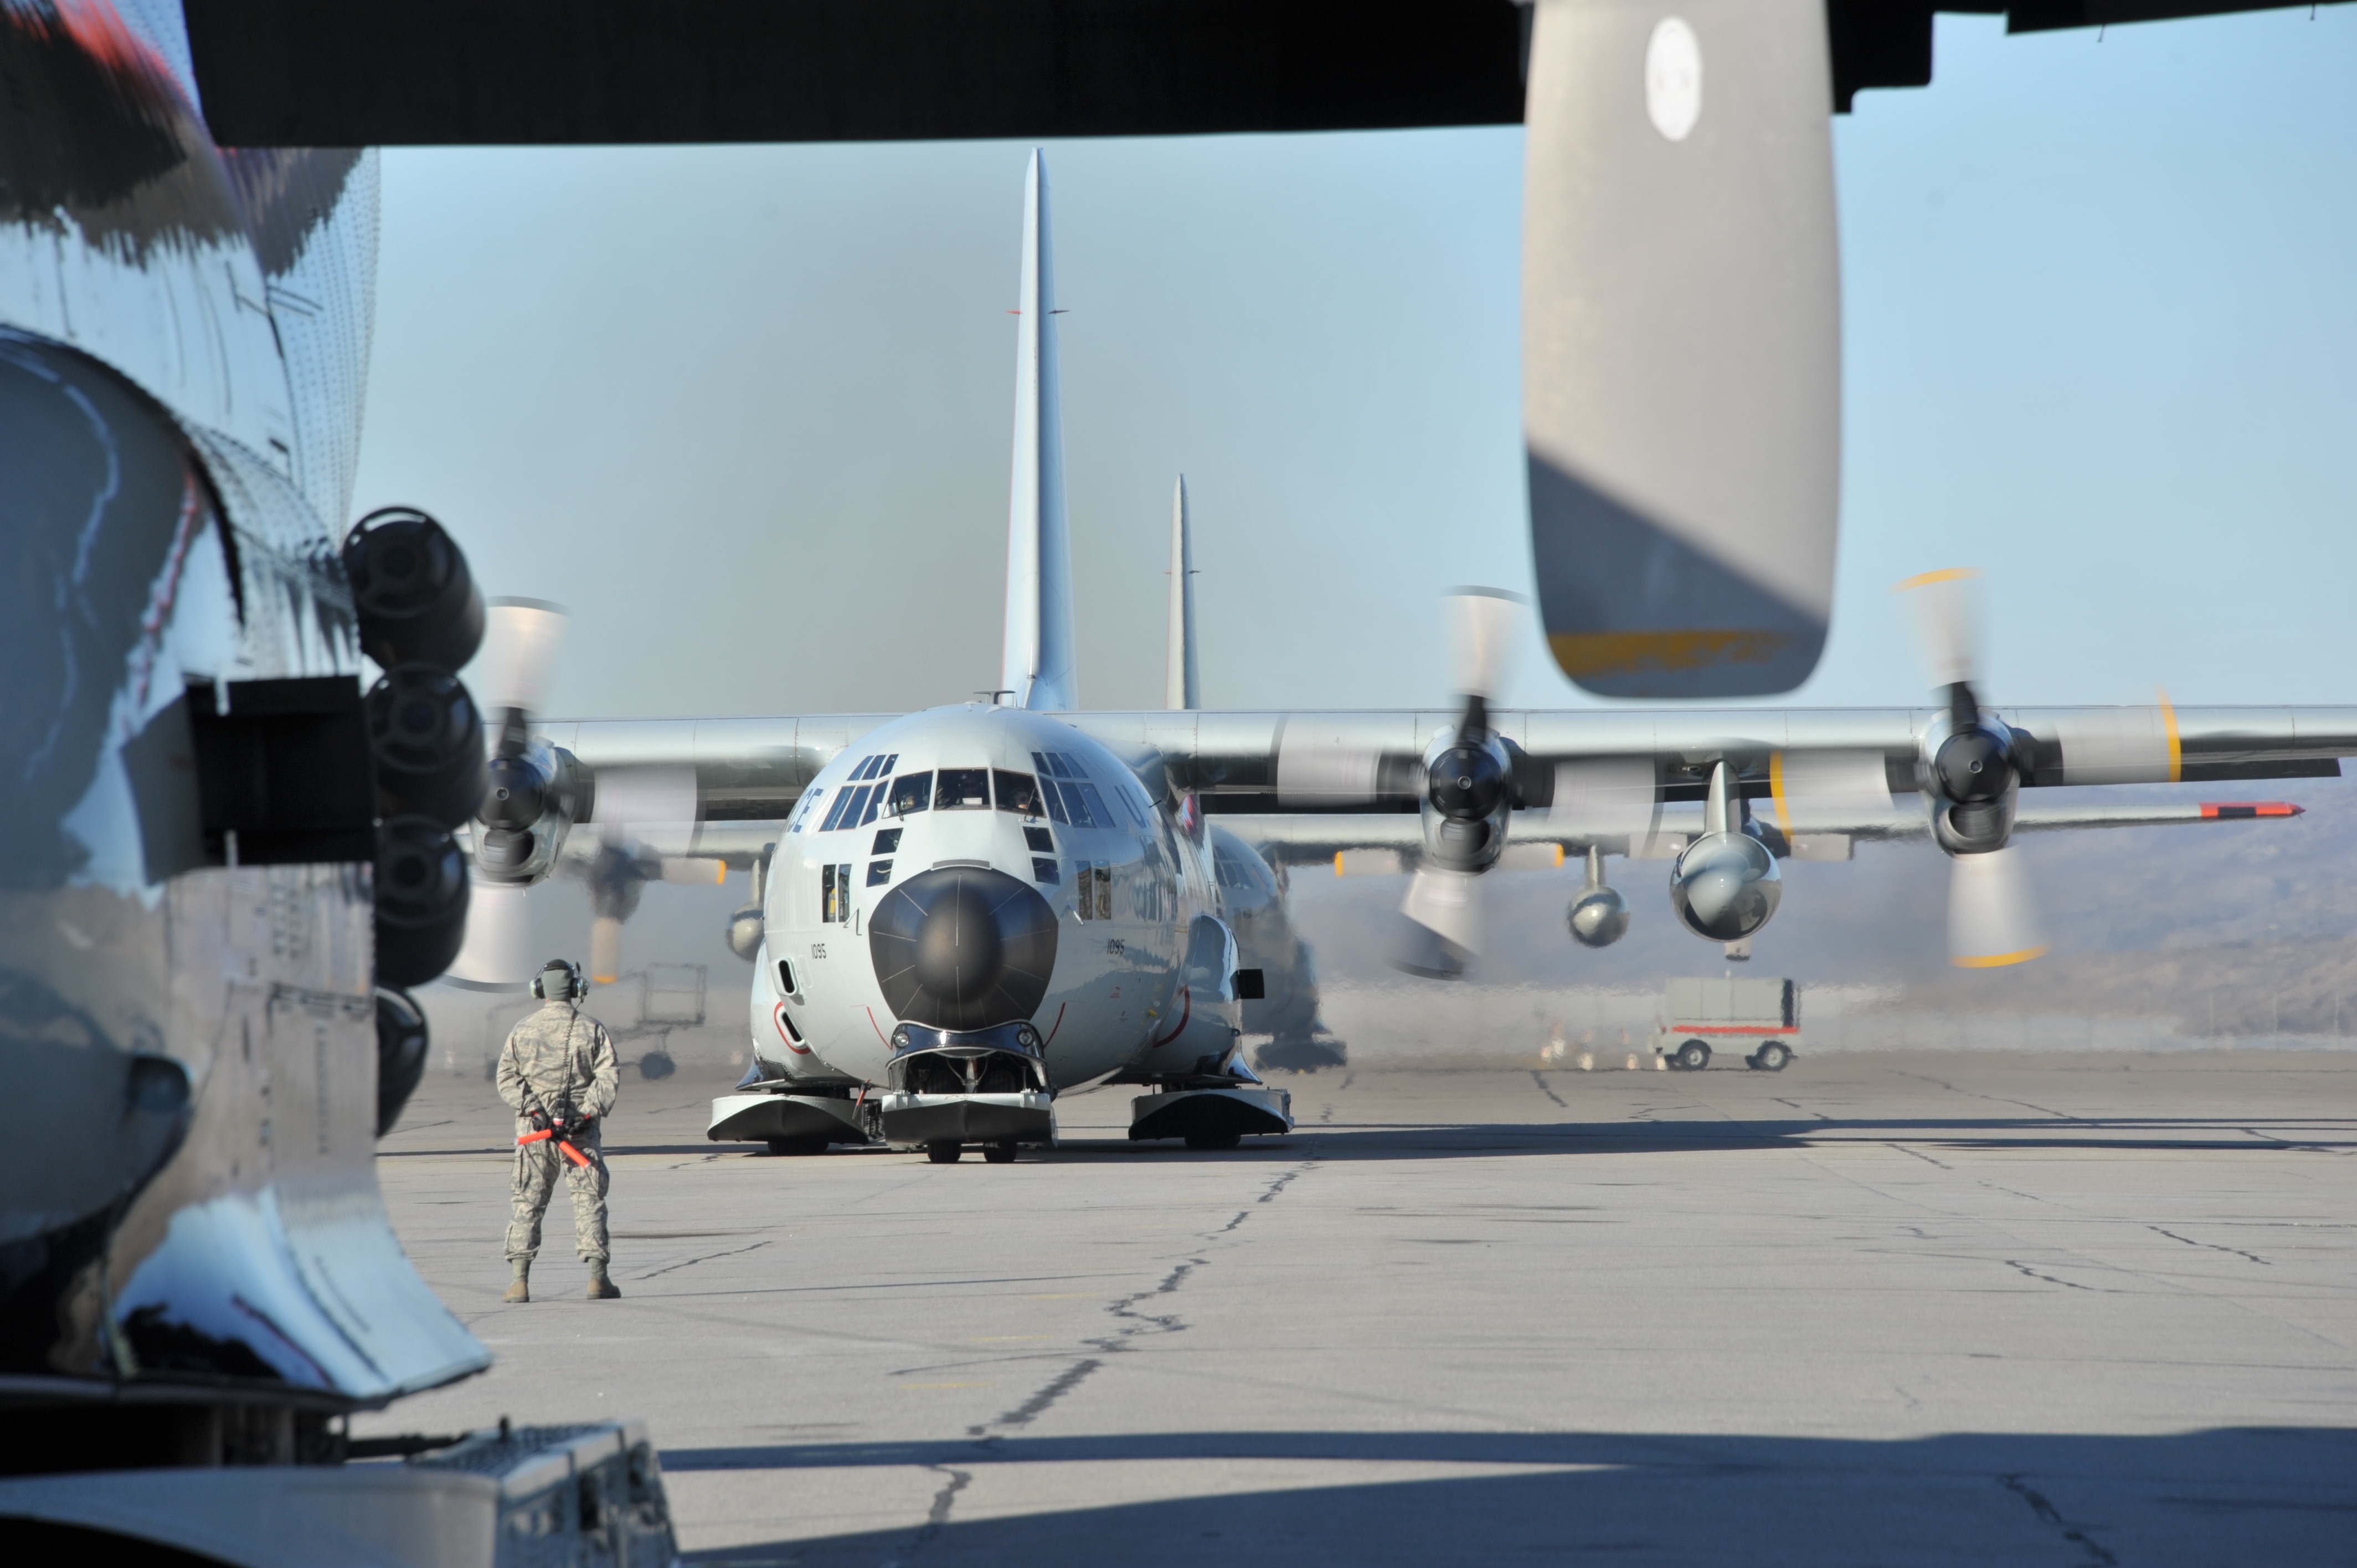 Ski-equipped LC-130 Hercules getting ready for take-off in Kangerlussuaq airport